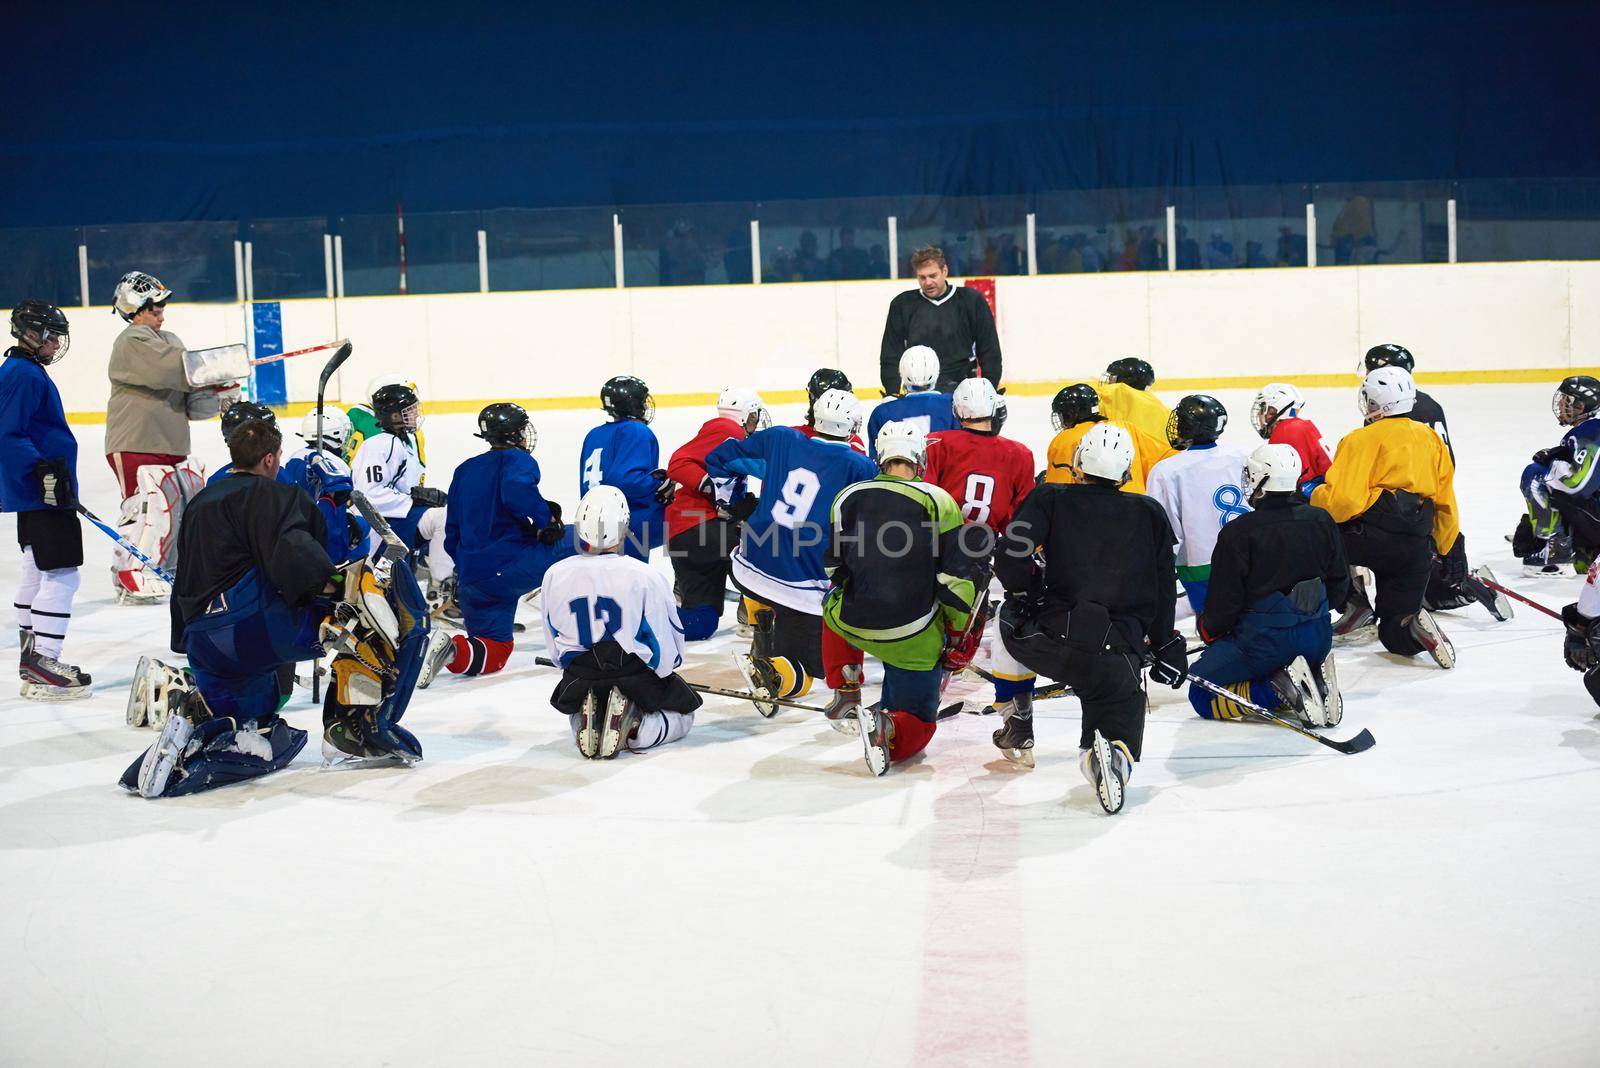 ice hockey players team group meeting with trainer  in sport arena indoors